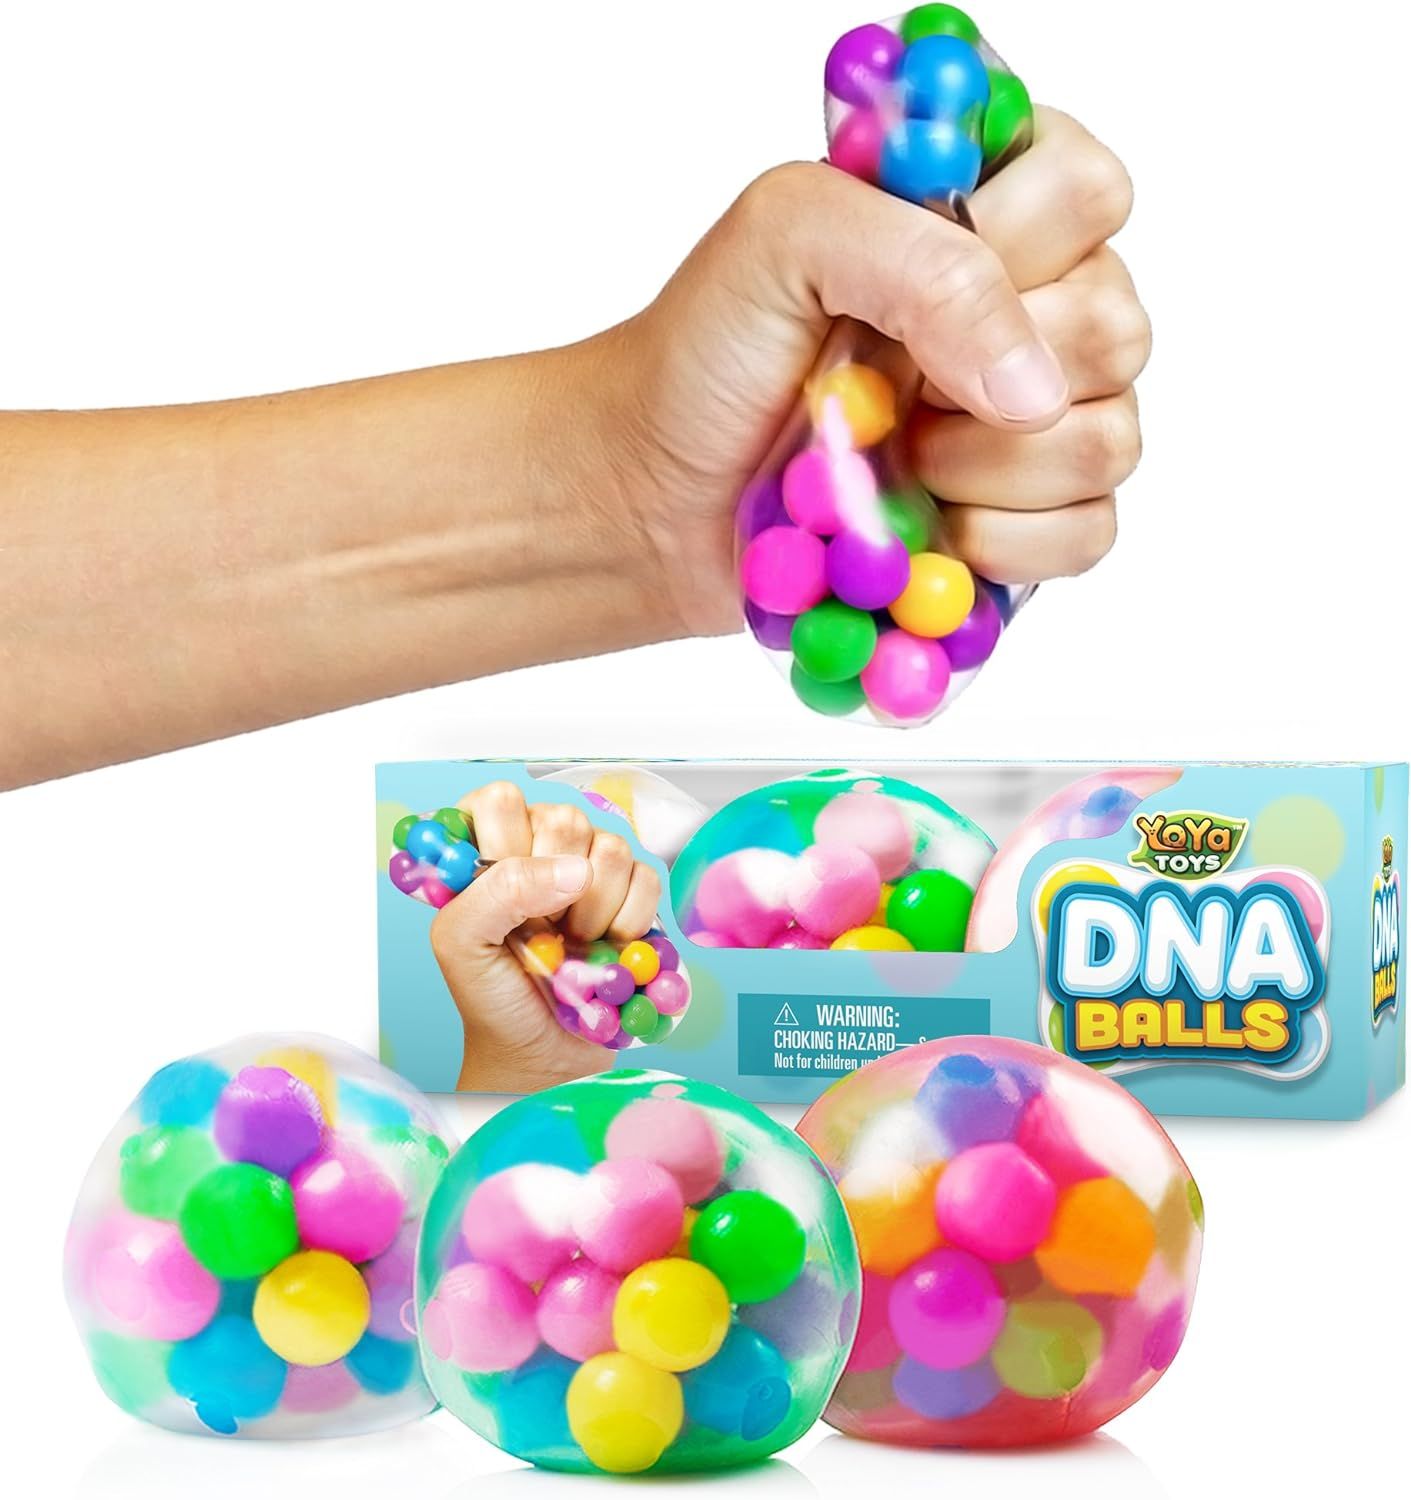 YoYa Toys DNA Balls - Fidget Stress Balls Set - 3 Pack - Colorful Jelly Beads and Squishy Rubber ... | Amazon (US)